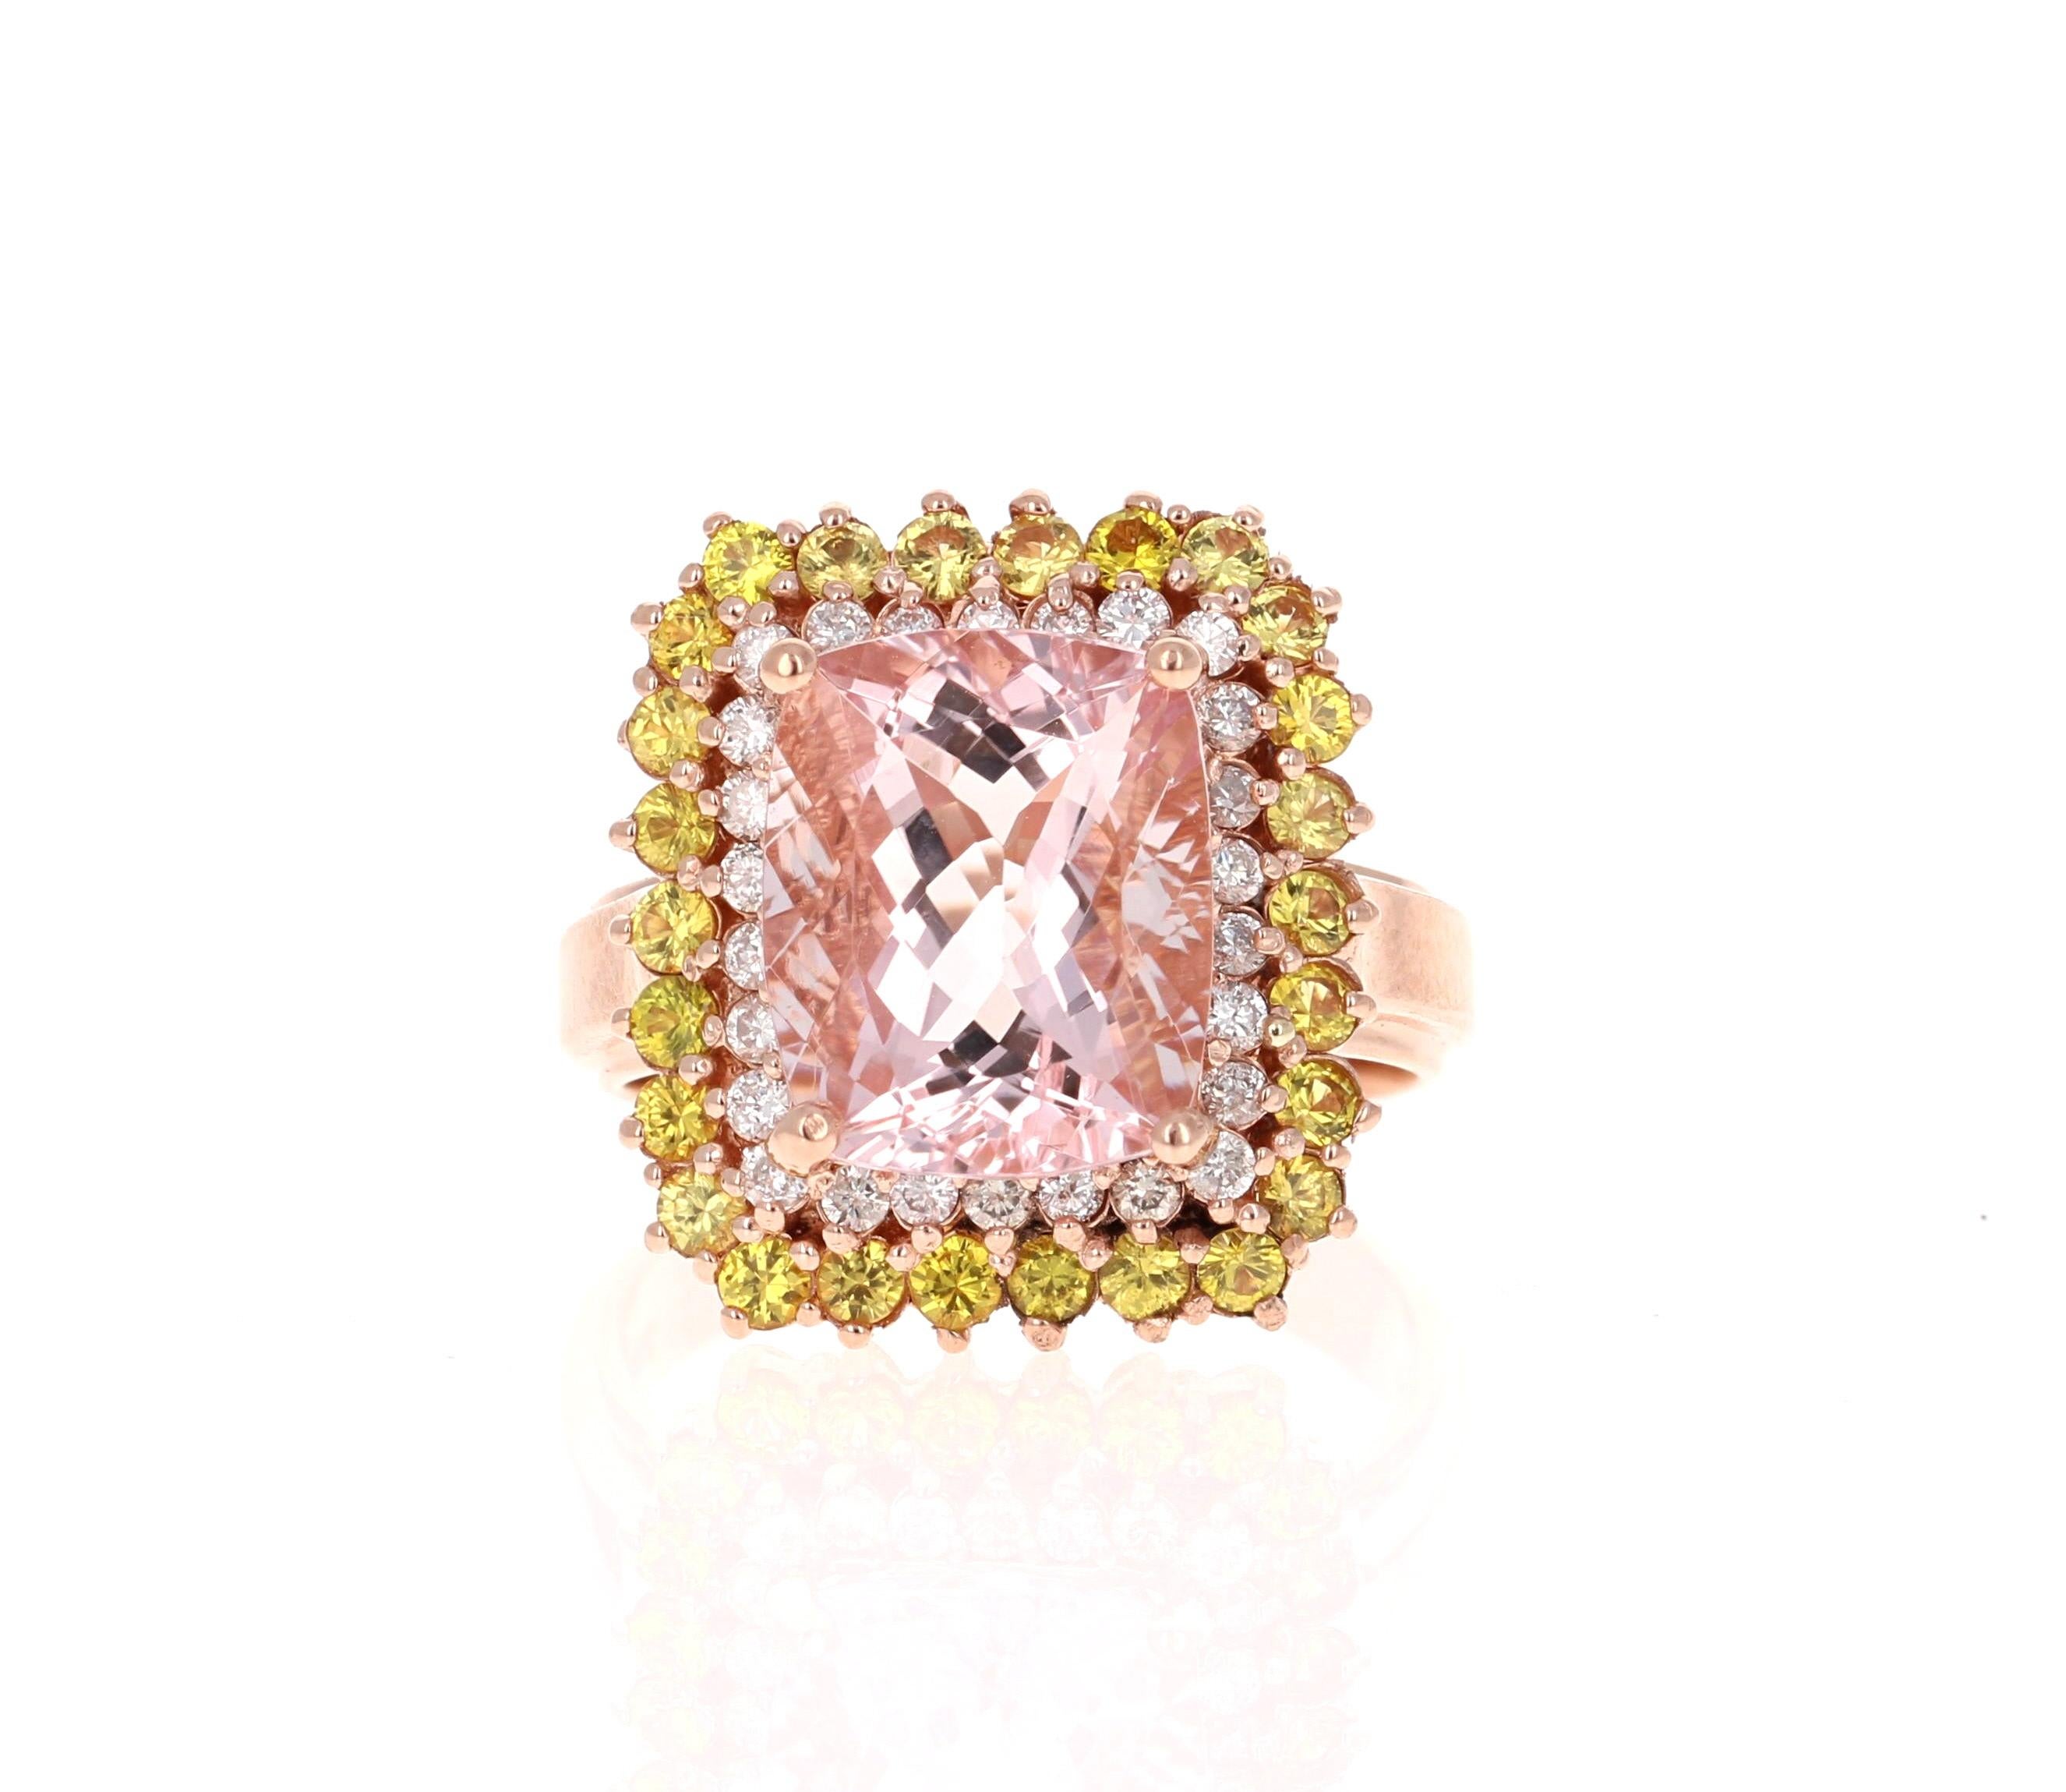 A lovely  Ring or as an alternate to a Pink Diamond Ring! 

This gorgeous and classy Morganite and Diamond Ring has a 5.03 Carat Cushion Cut Pink Morganite and is surrounded by a simple Halo of  26 Yellow Round Cut Sapphires that weigh 0.93 Carats